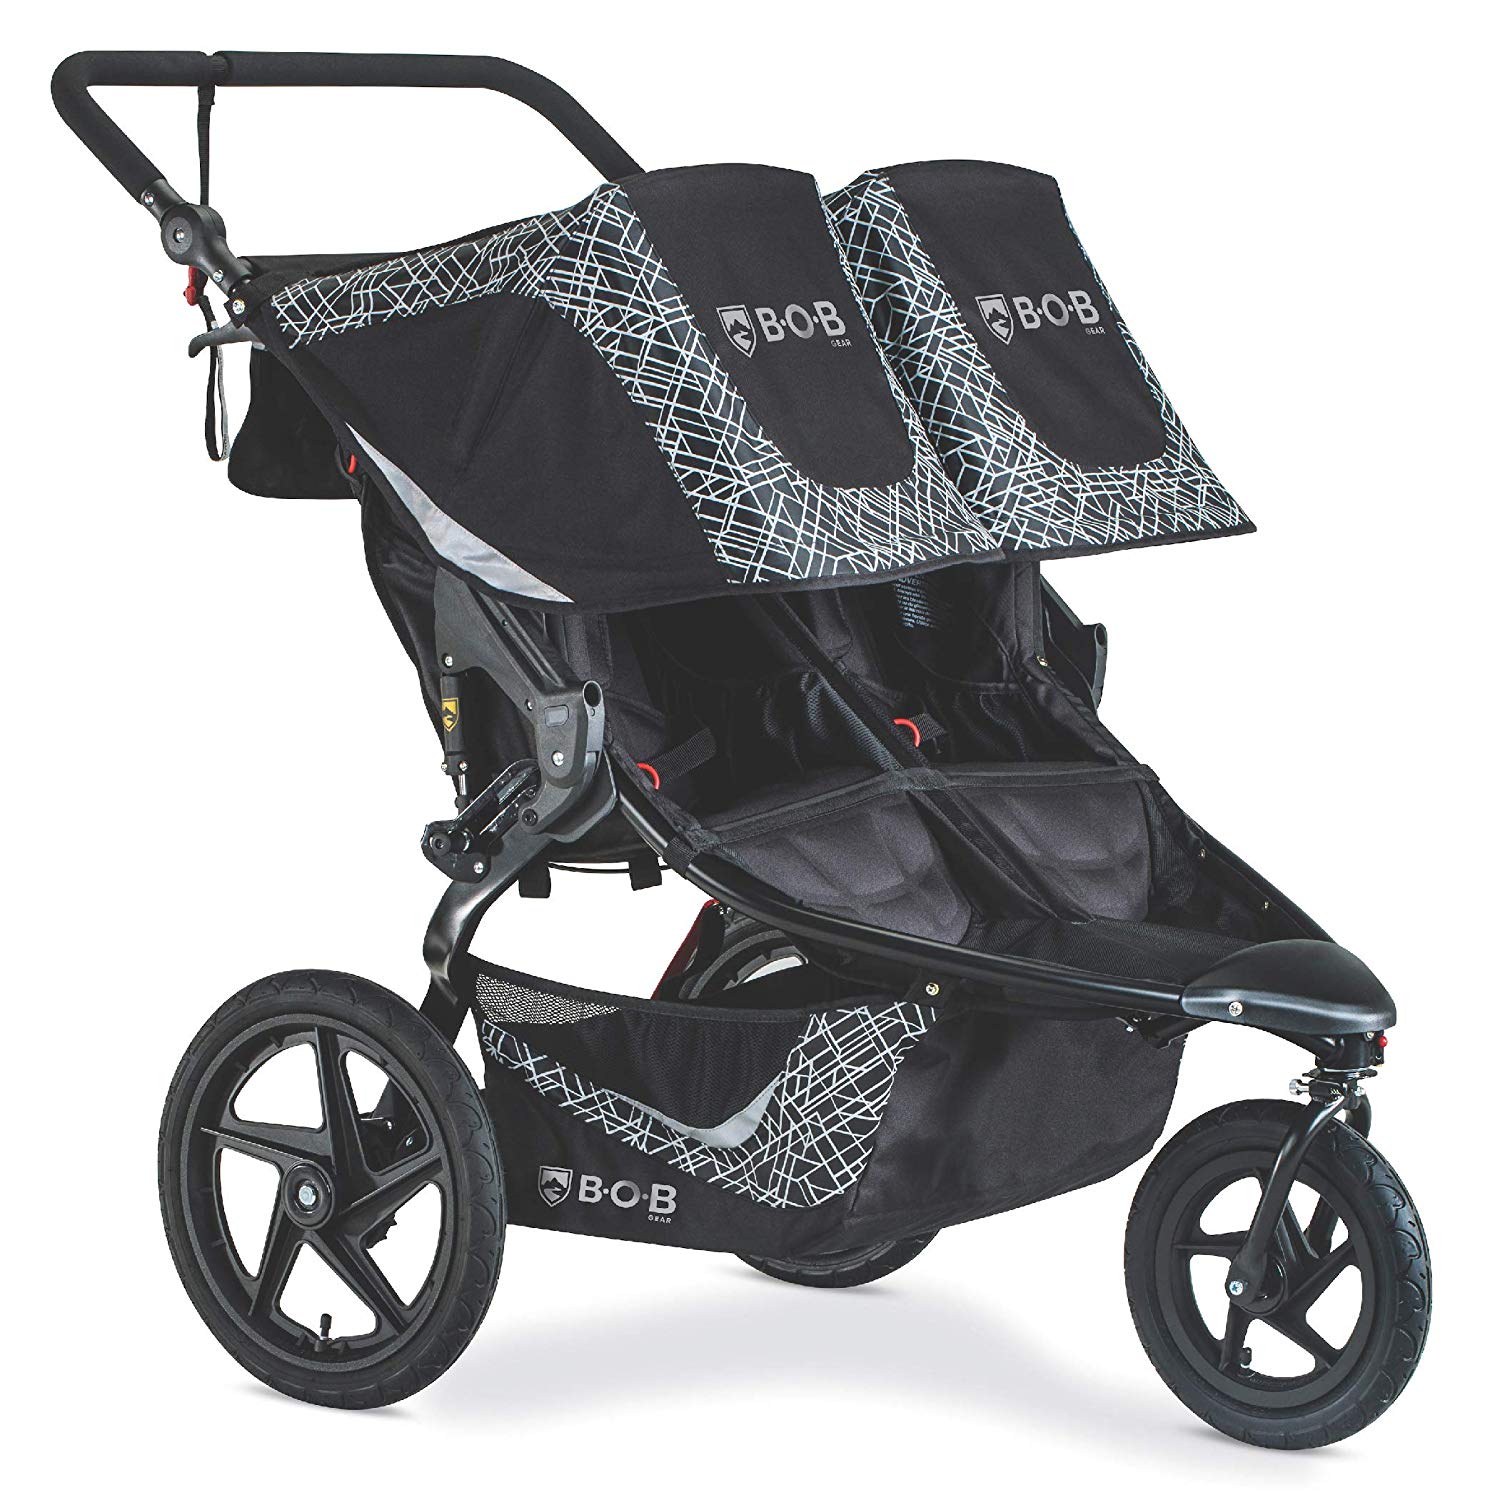 graco fastaction jogger lx travel system in mansfield